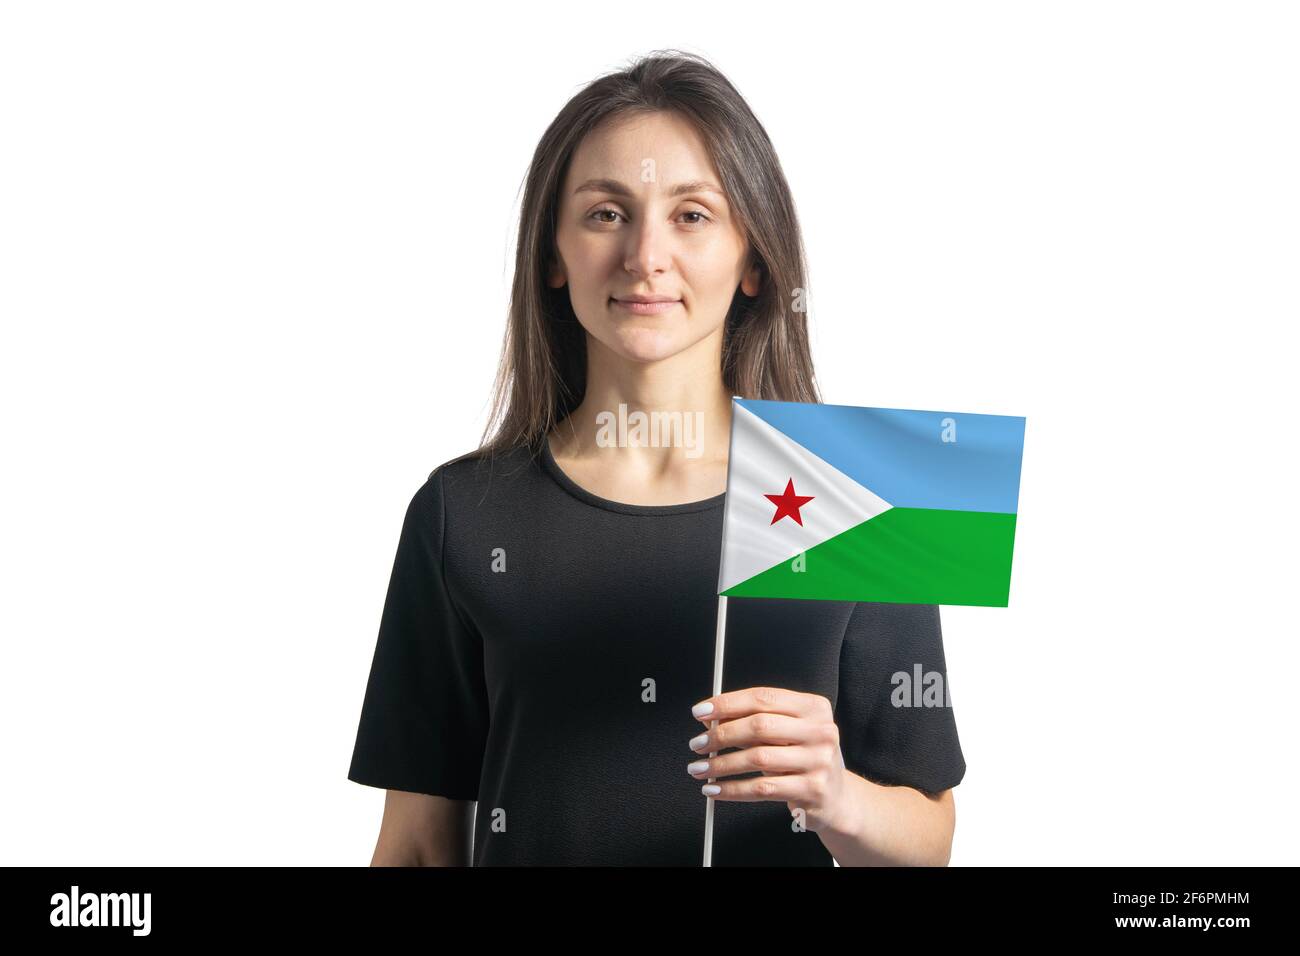 Happy young white girl holding Djibouti flag isolated on a white background. Stock Photo